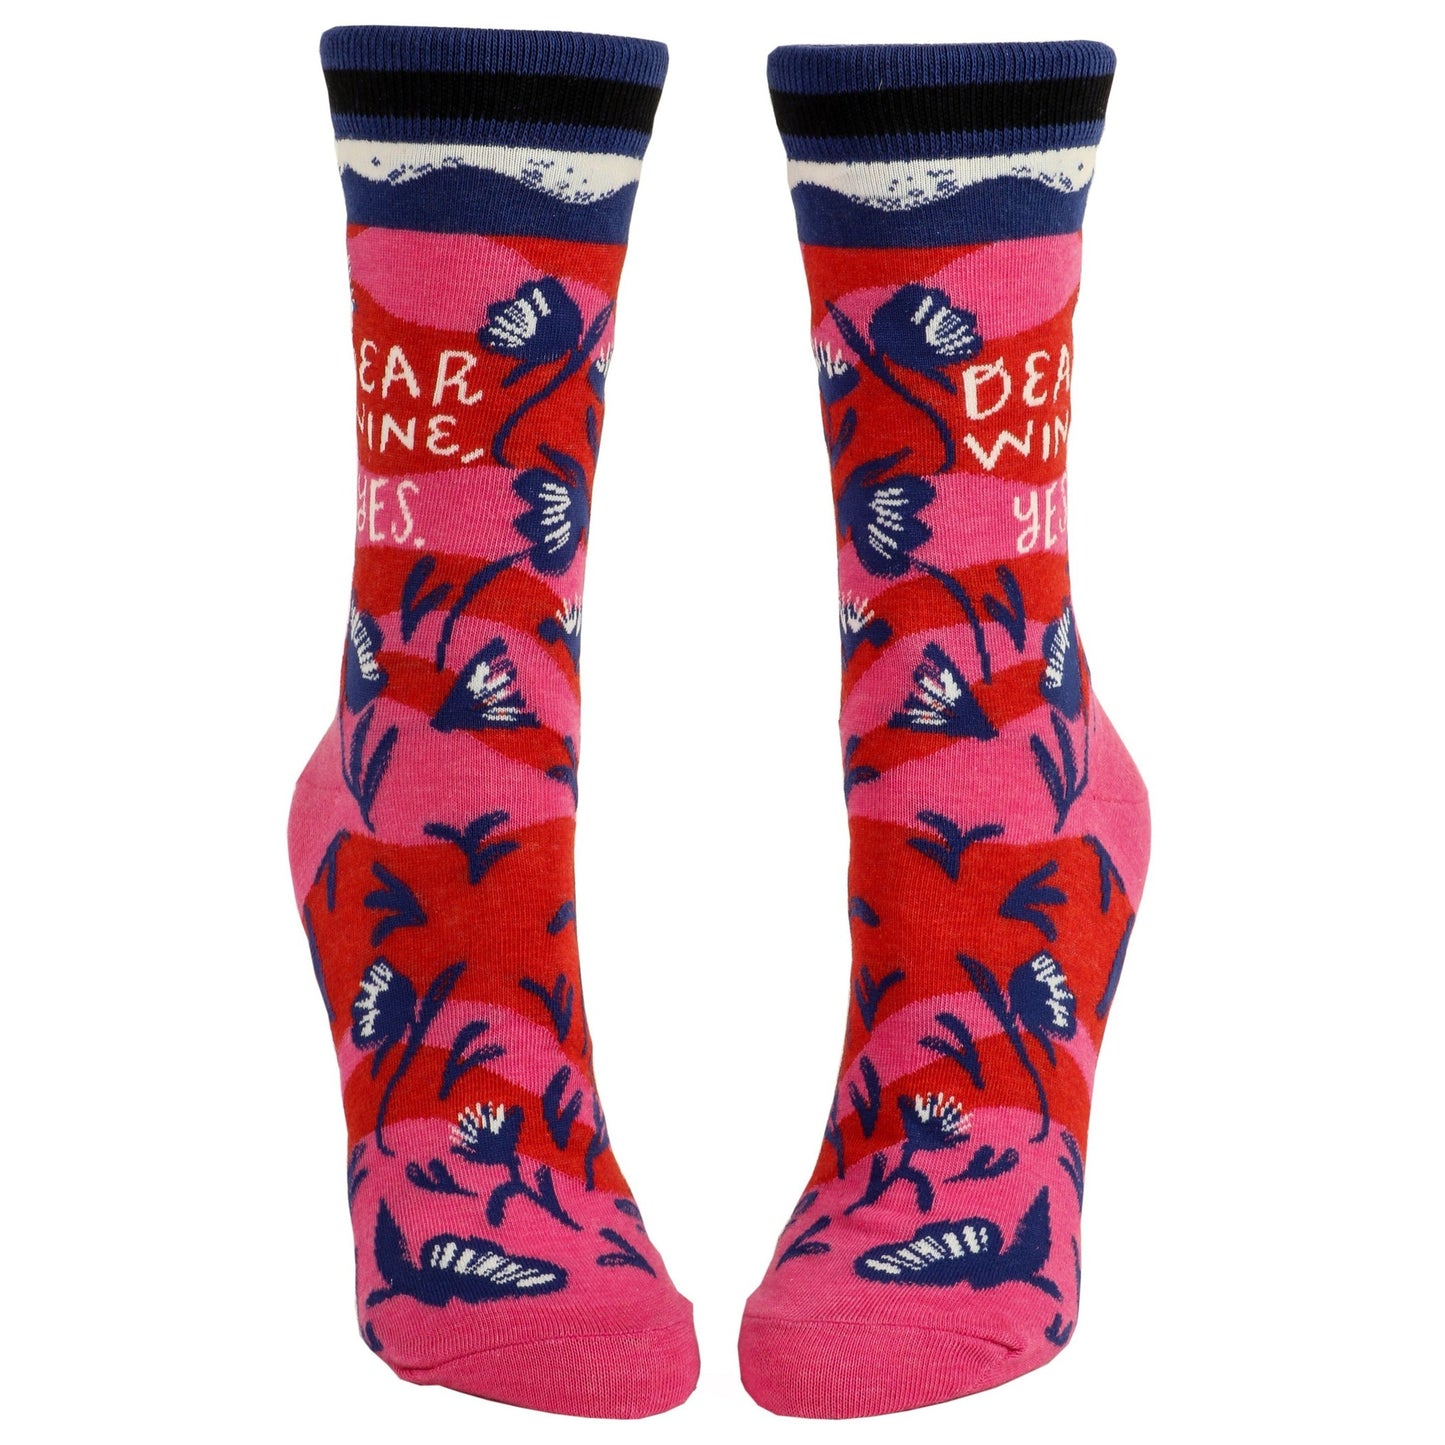 Dear Wine, Yes Women's Crew Socks in Pink and Red